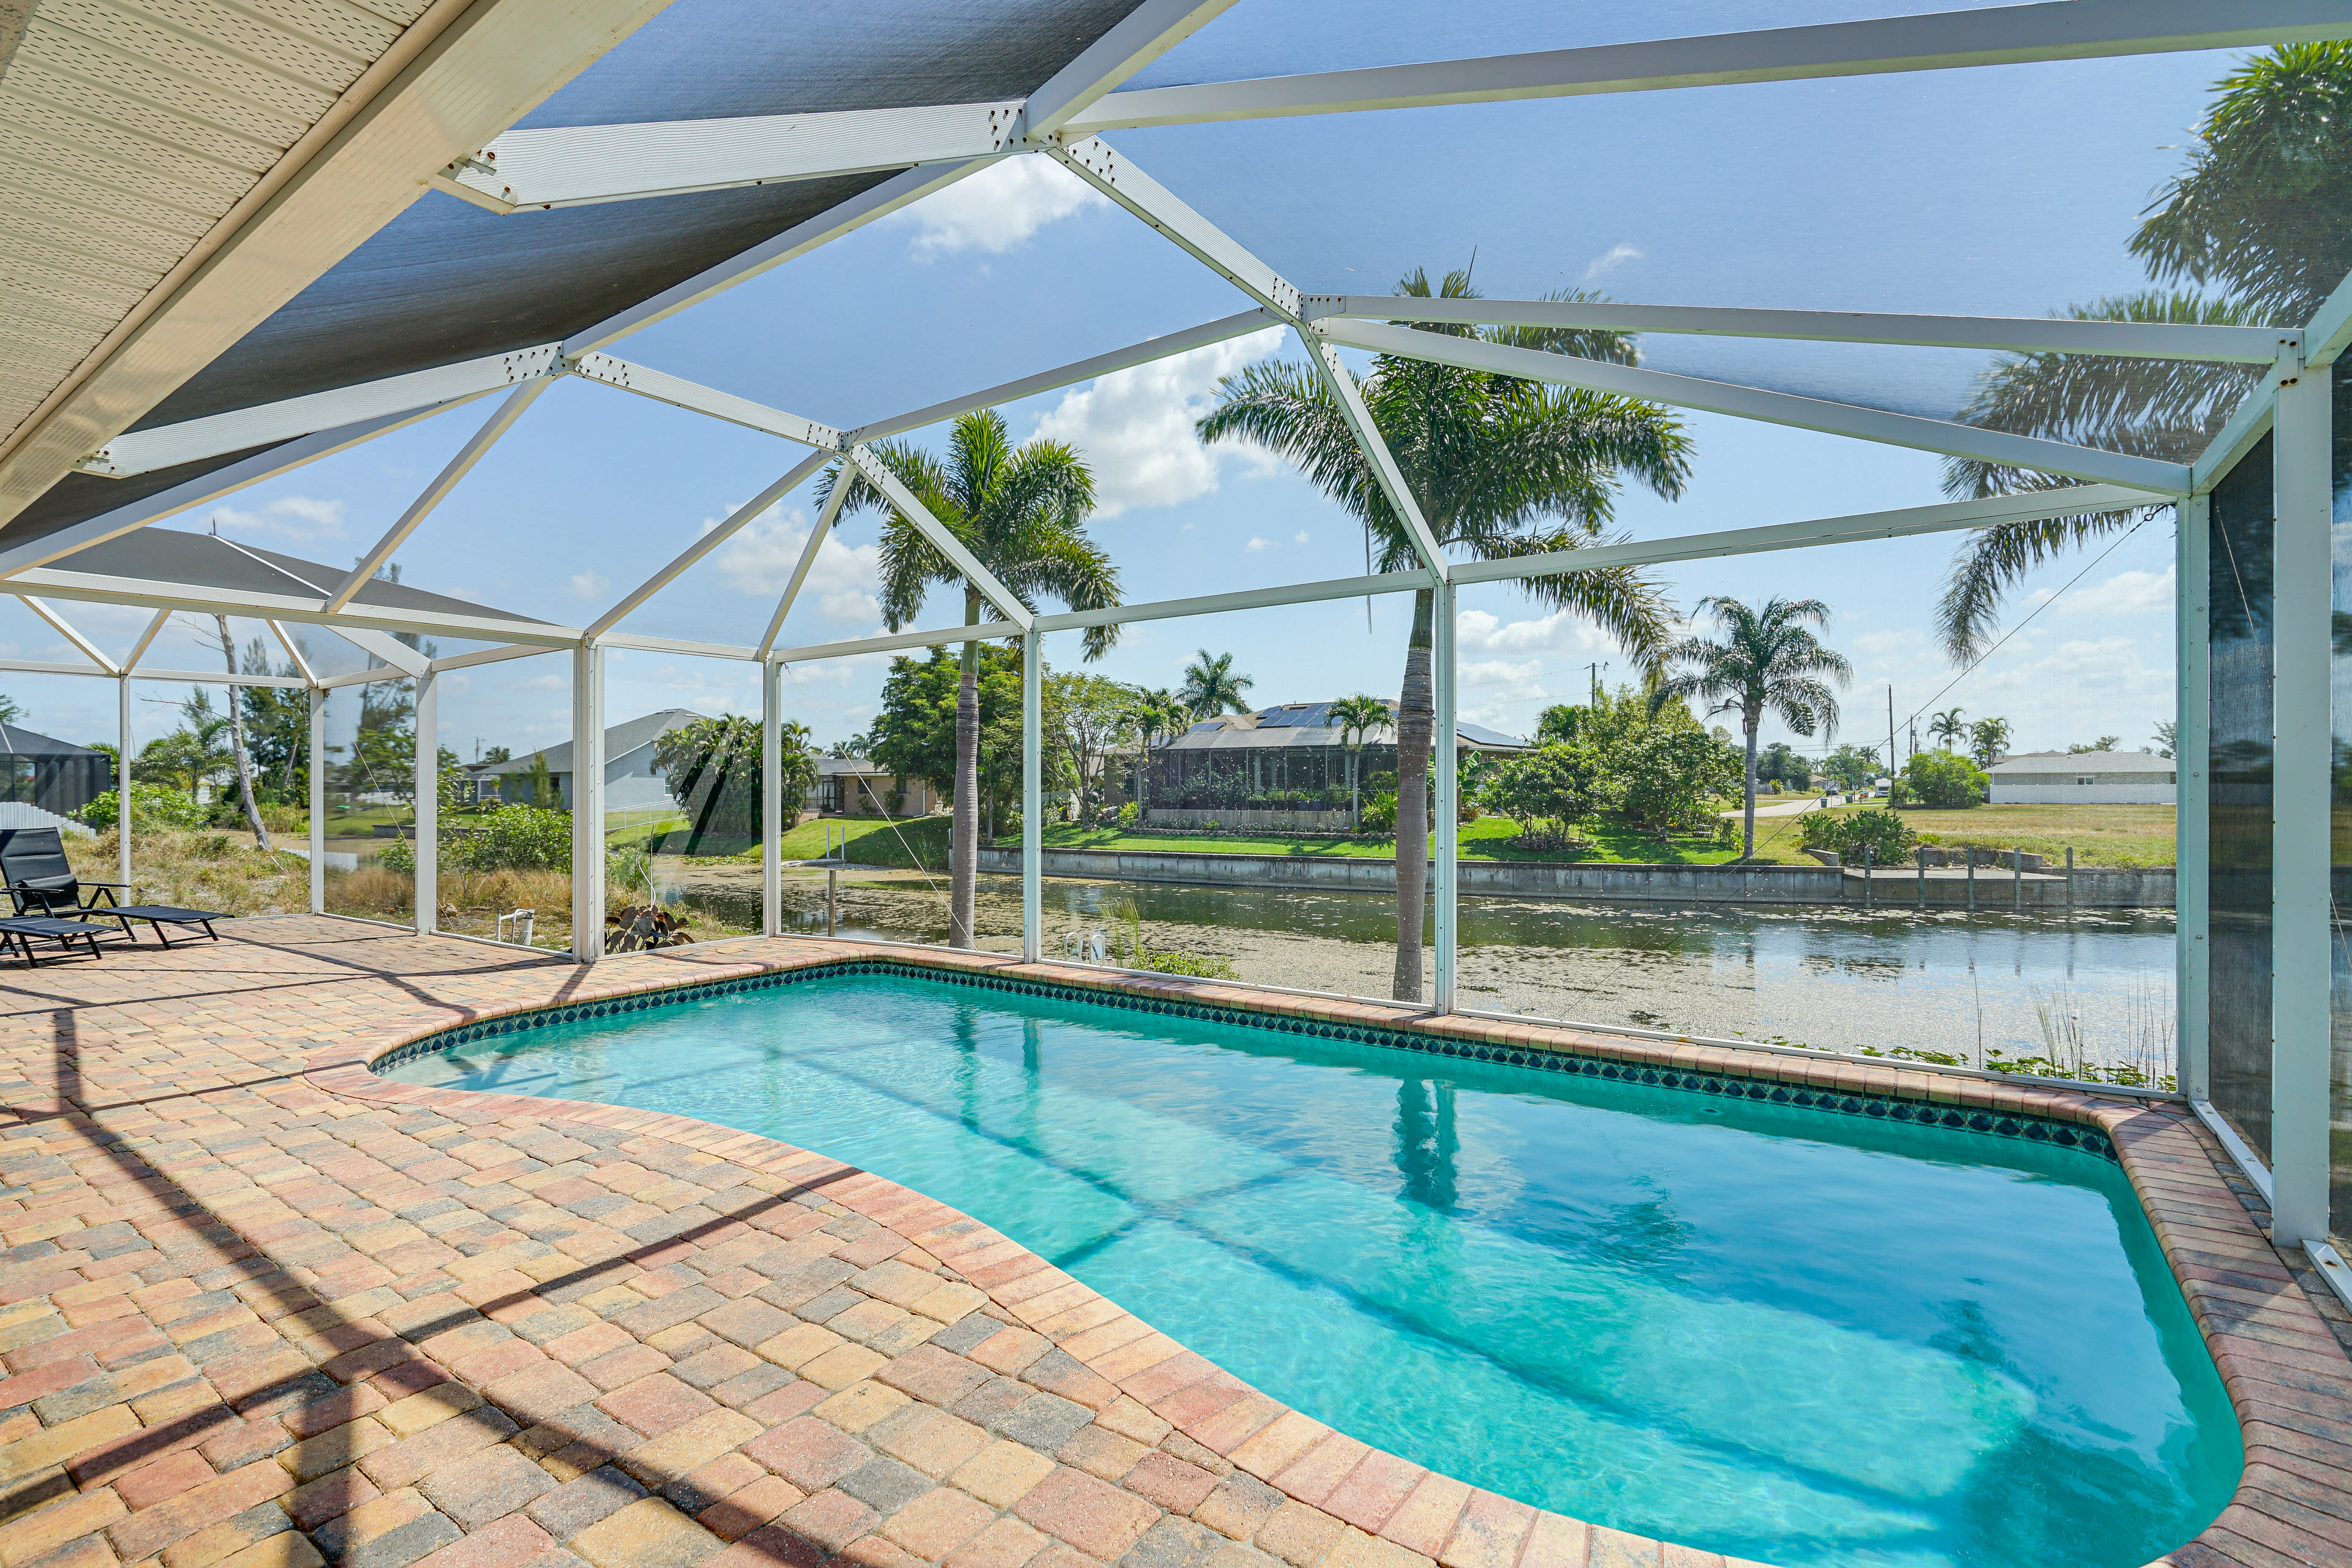 Cape Coral Vacation Rental | 4BR | 2BA | 1,642 Sq Ft | Step-Free Entry